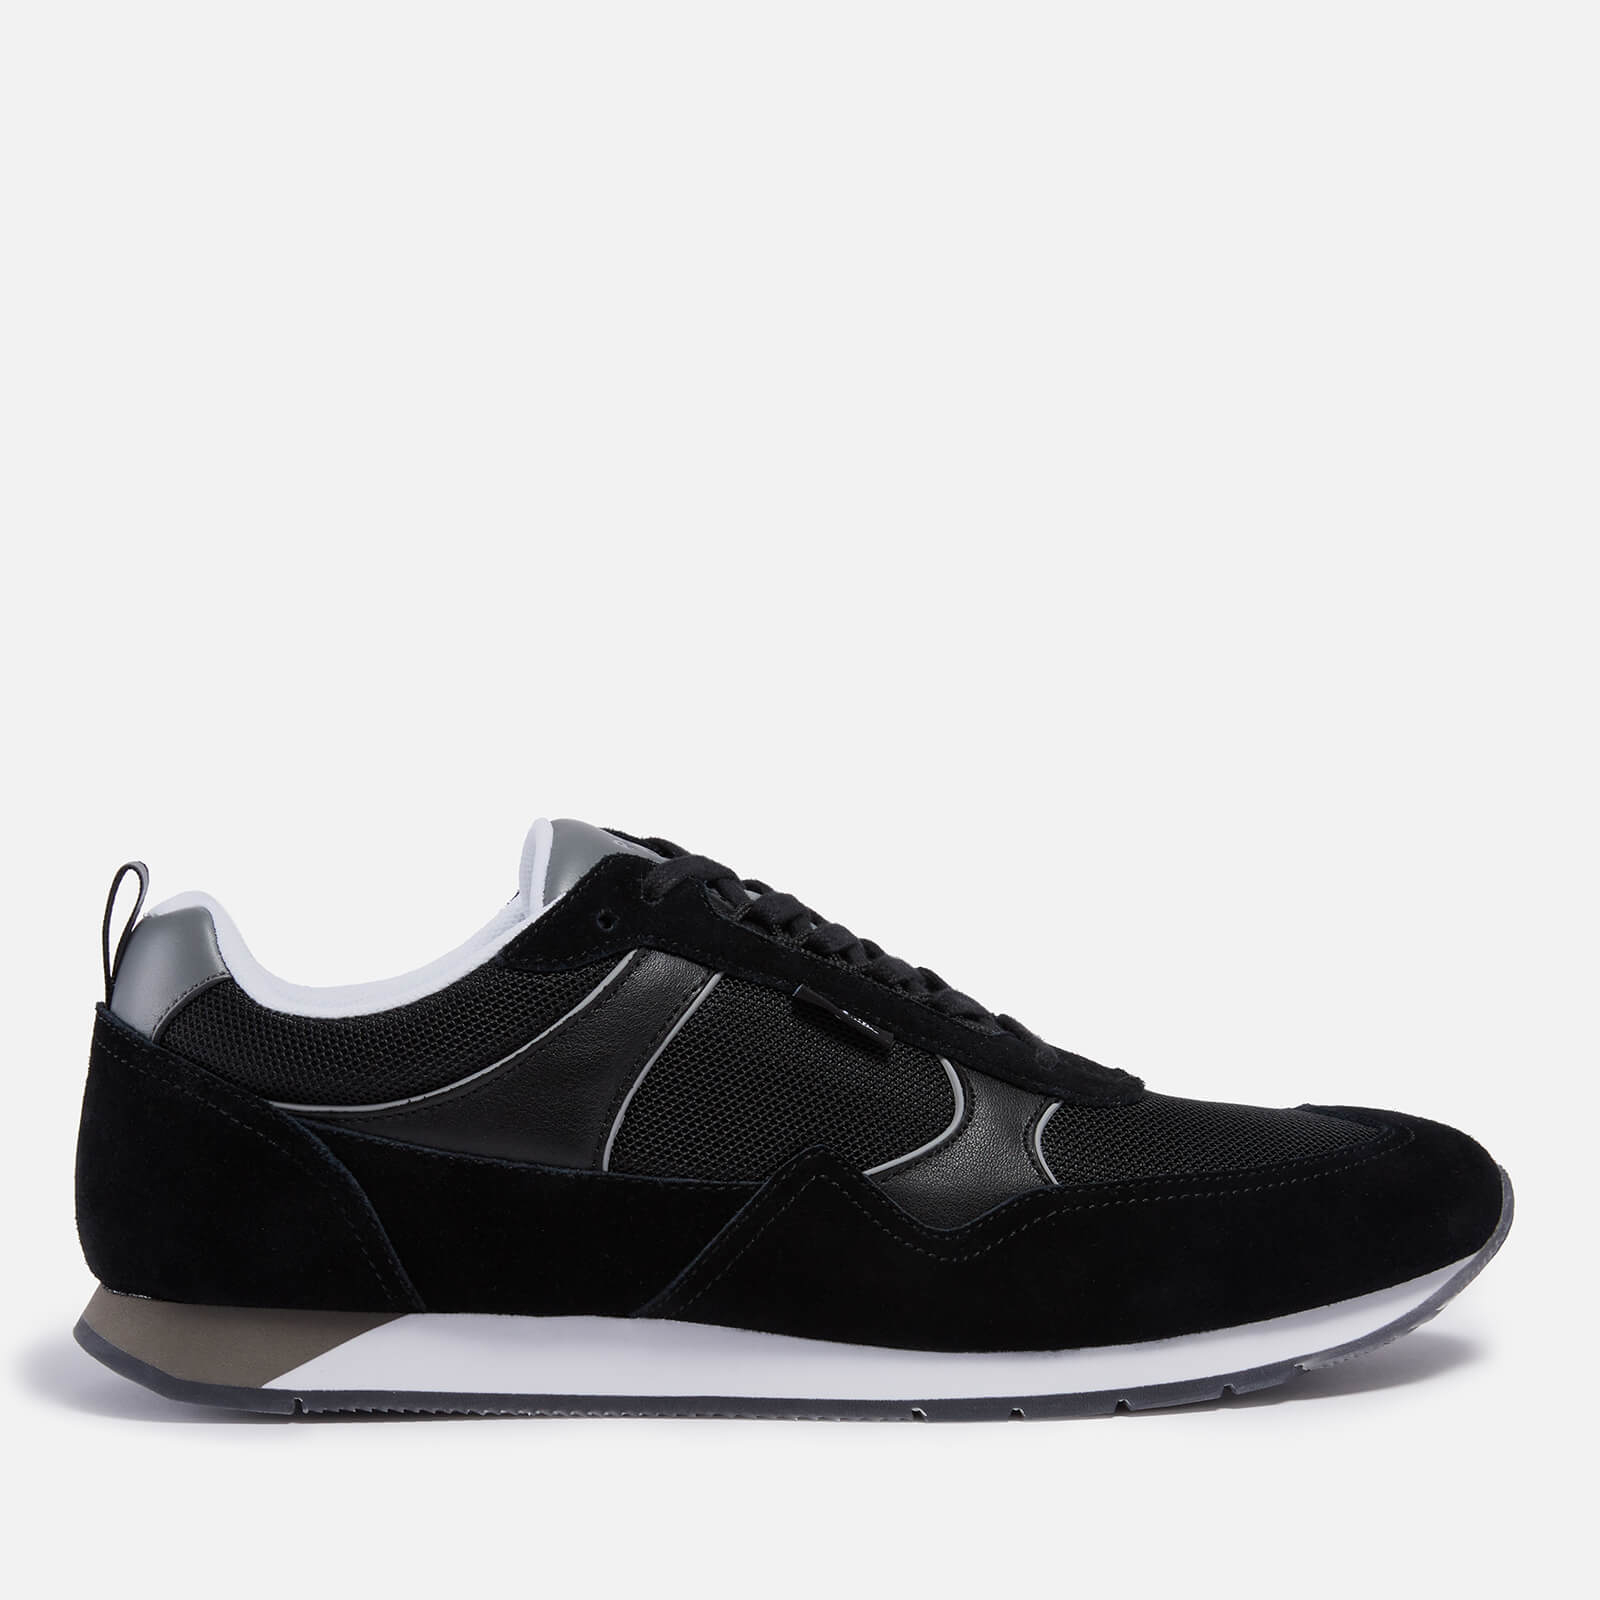 PS Paul Smith Men's Will Running Style Trainers - Black - UK 7